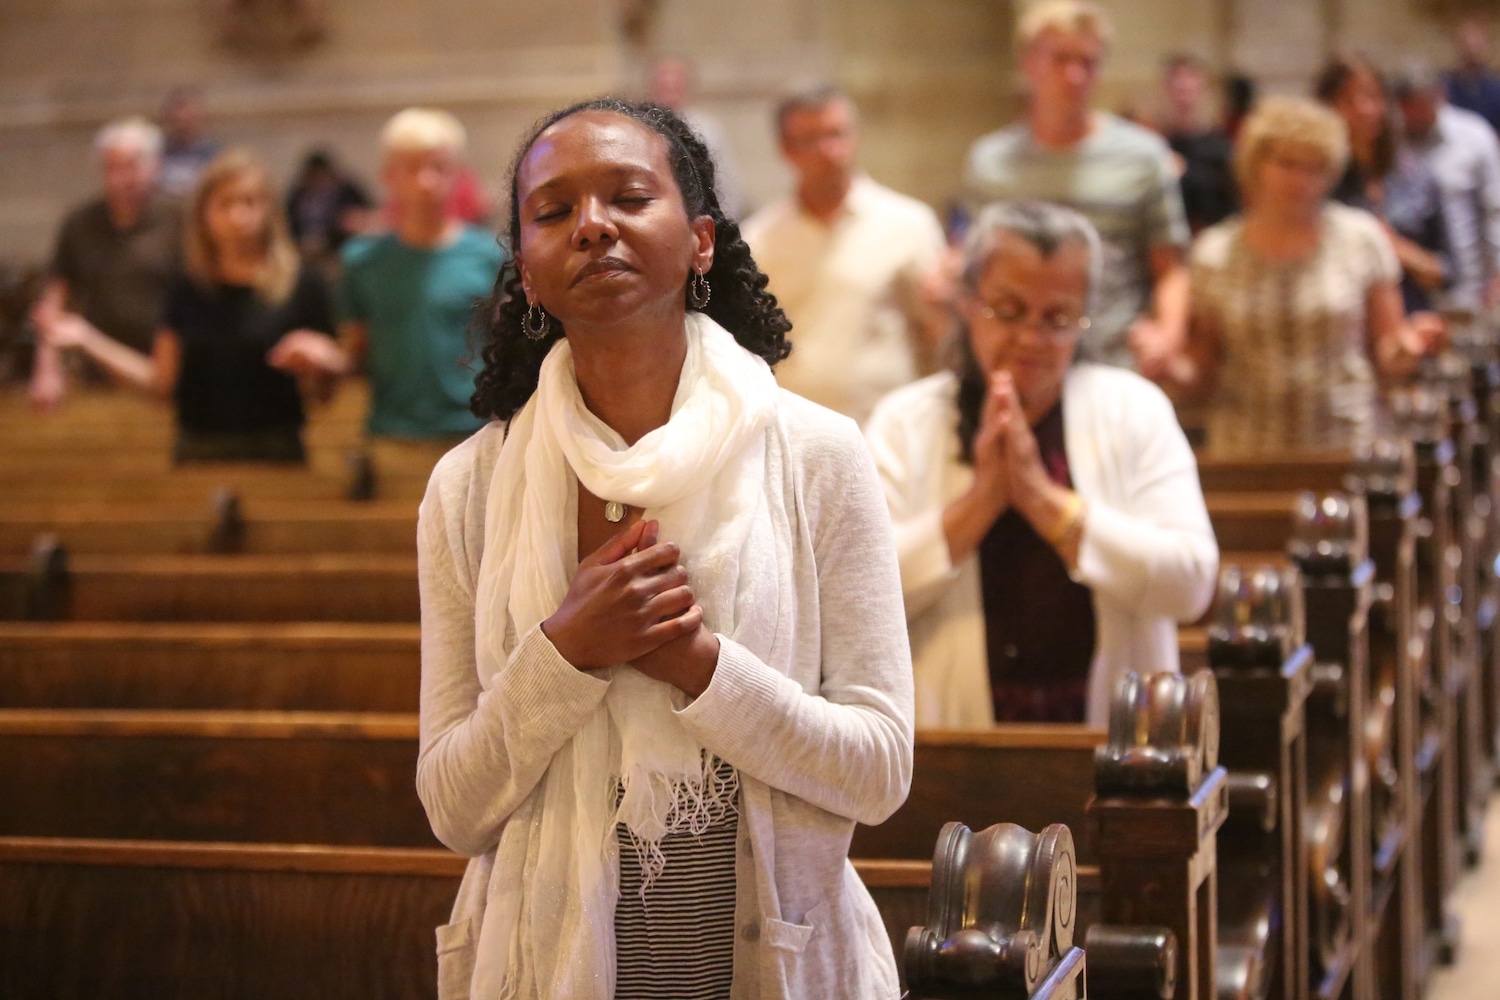 A woman prays at the Cathedral of St. Paul in Minnesota.